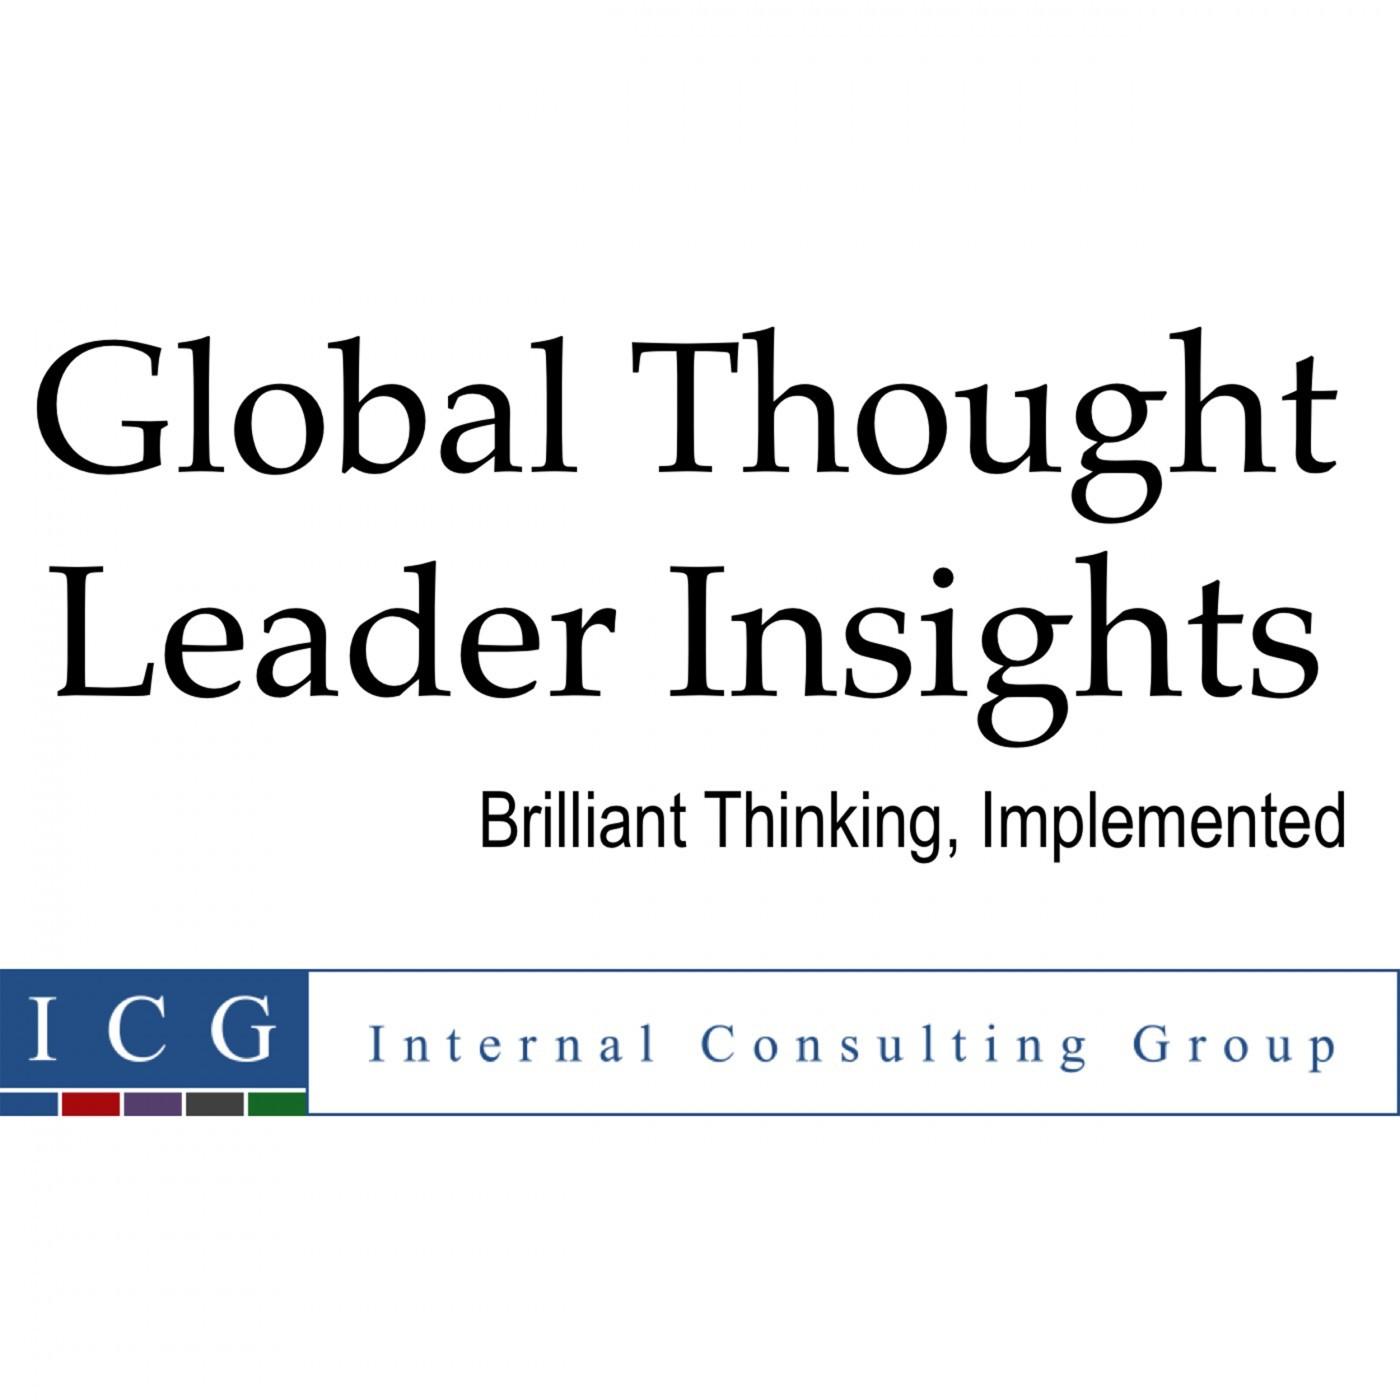 Global Thought Leader Insights